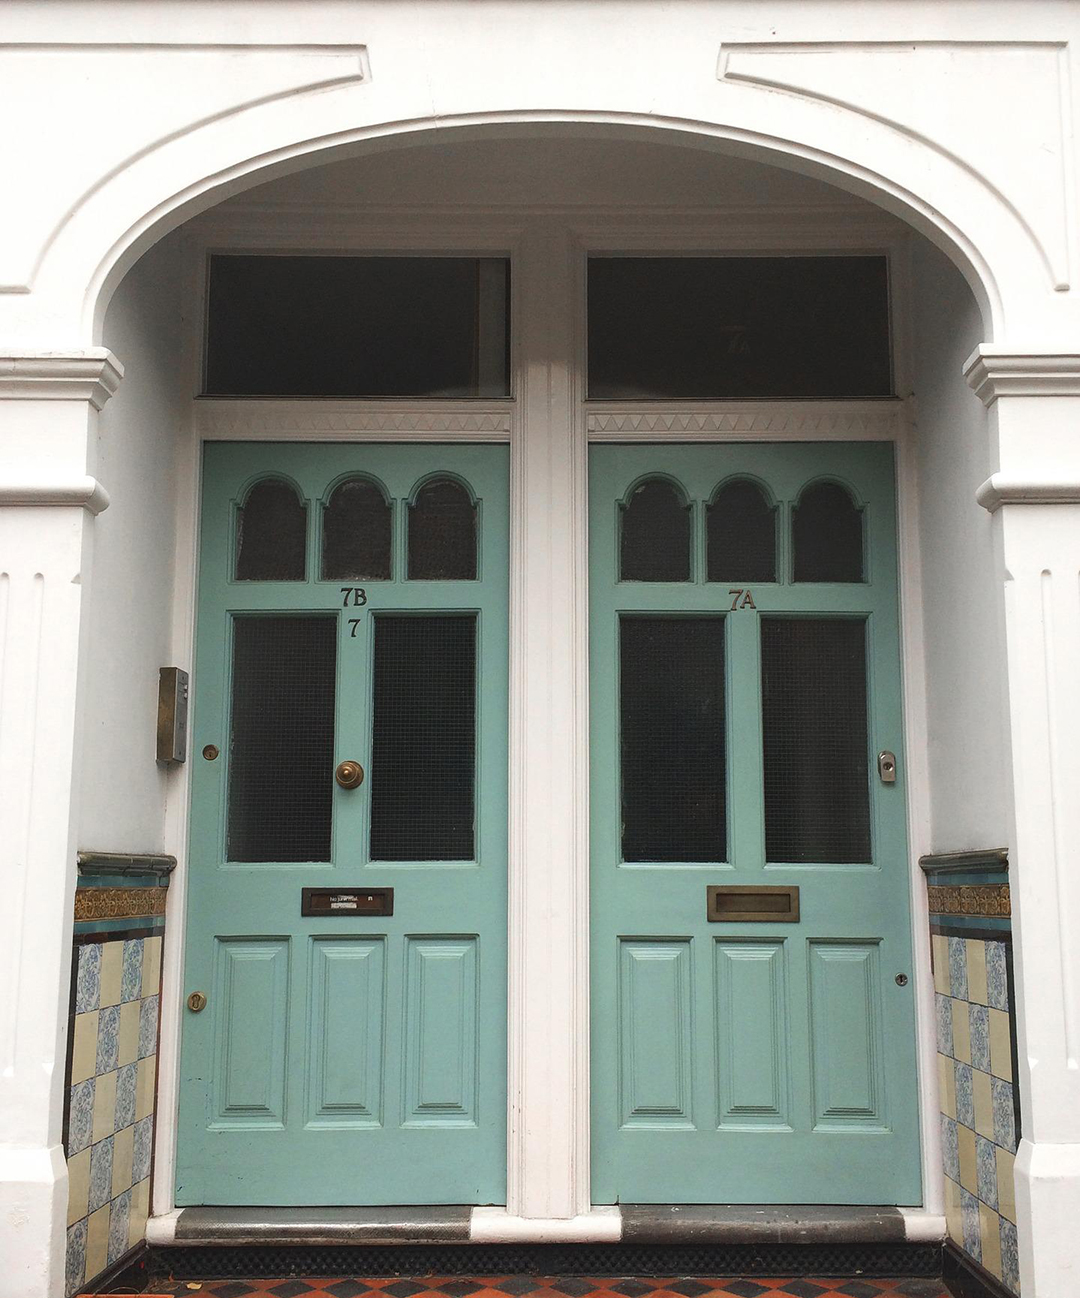 Two mint green front doors in an alcove